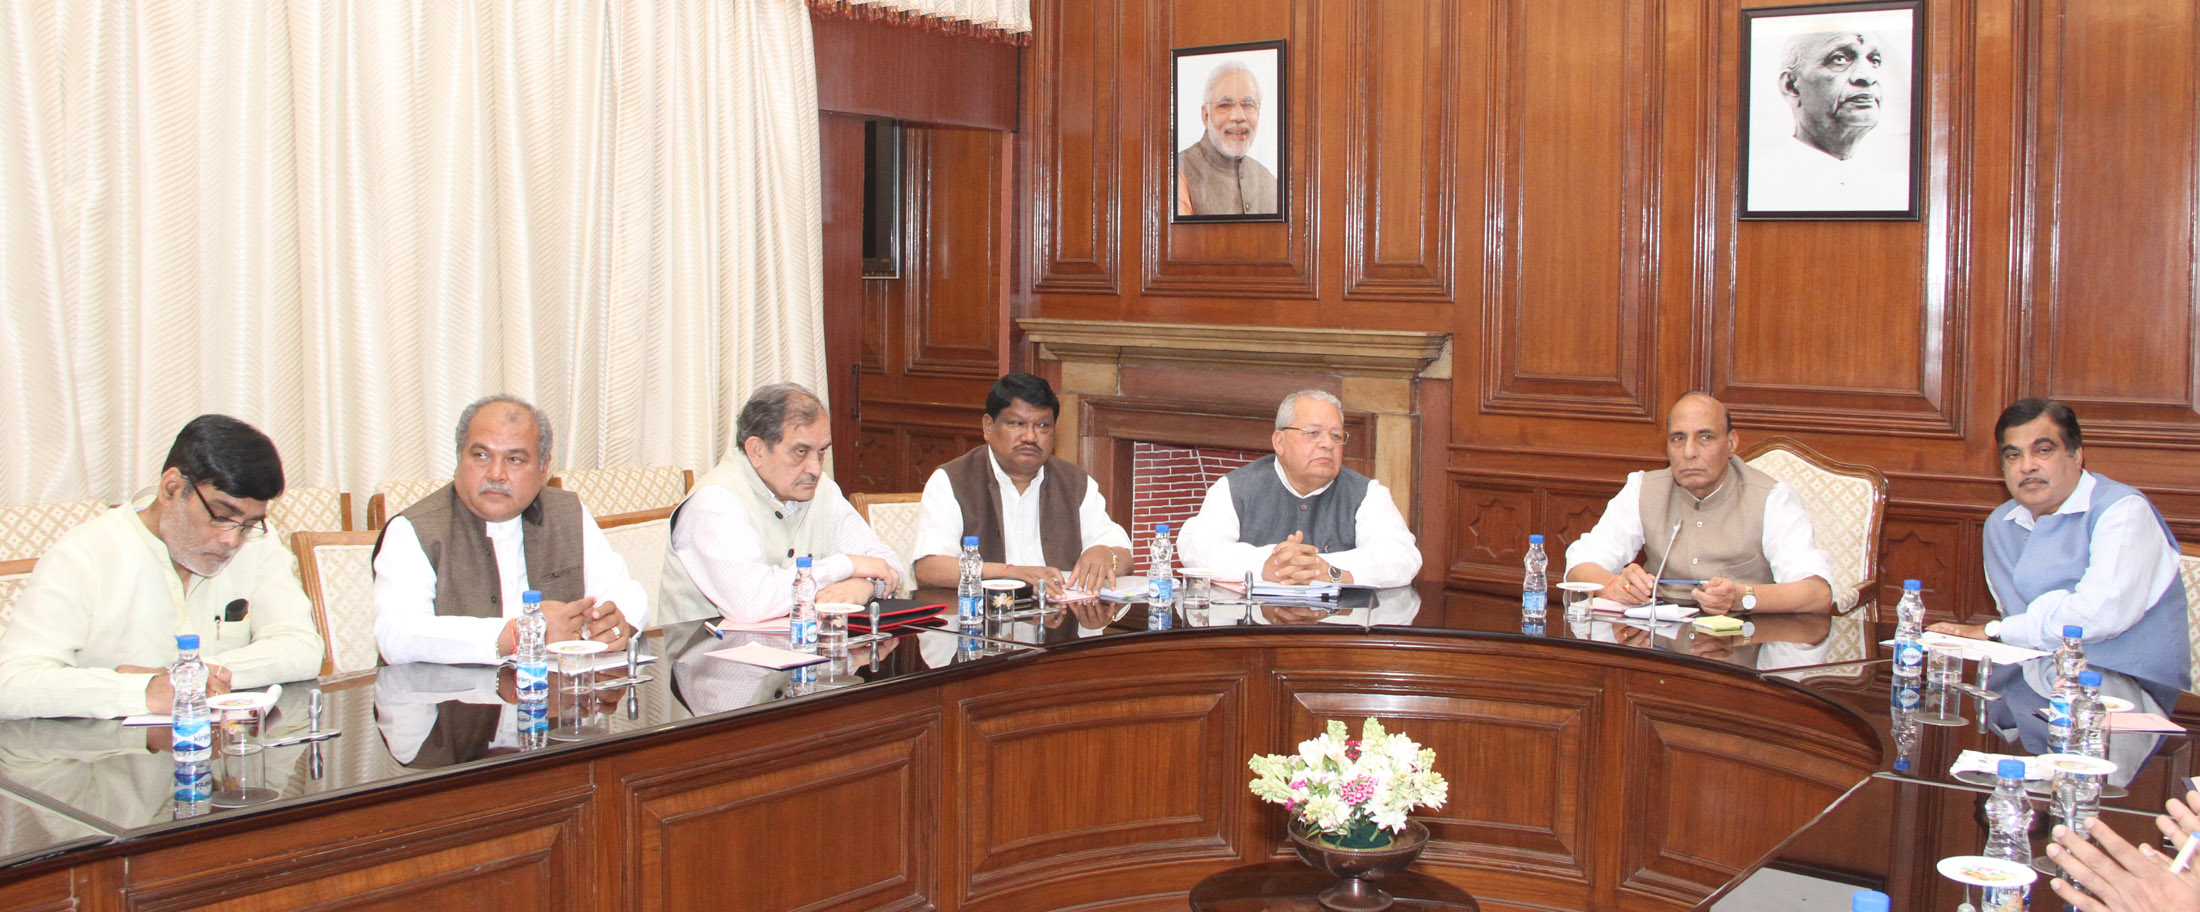 The Union Home Minister, Shri Rajnath Singh chairing the Group of Ministers meeting on the Rural Housing Scheme "Pradhan Mantri Awas Yojana- Gramin", in New Delhi on March 04, 2016.